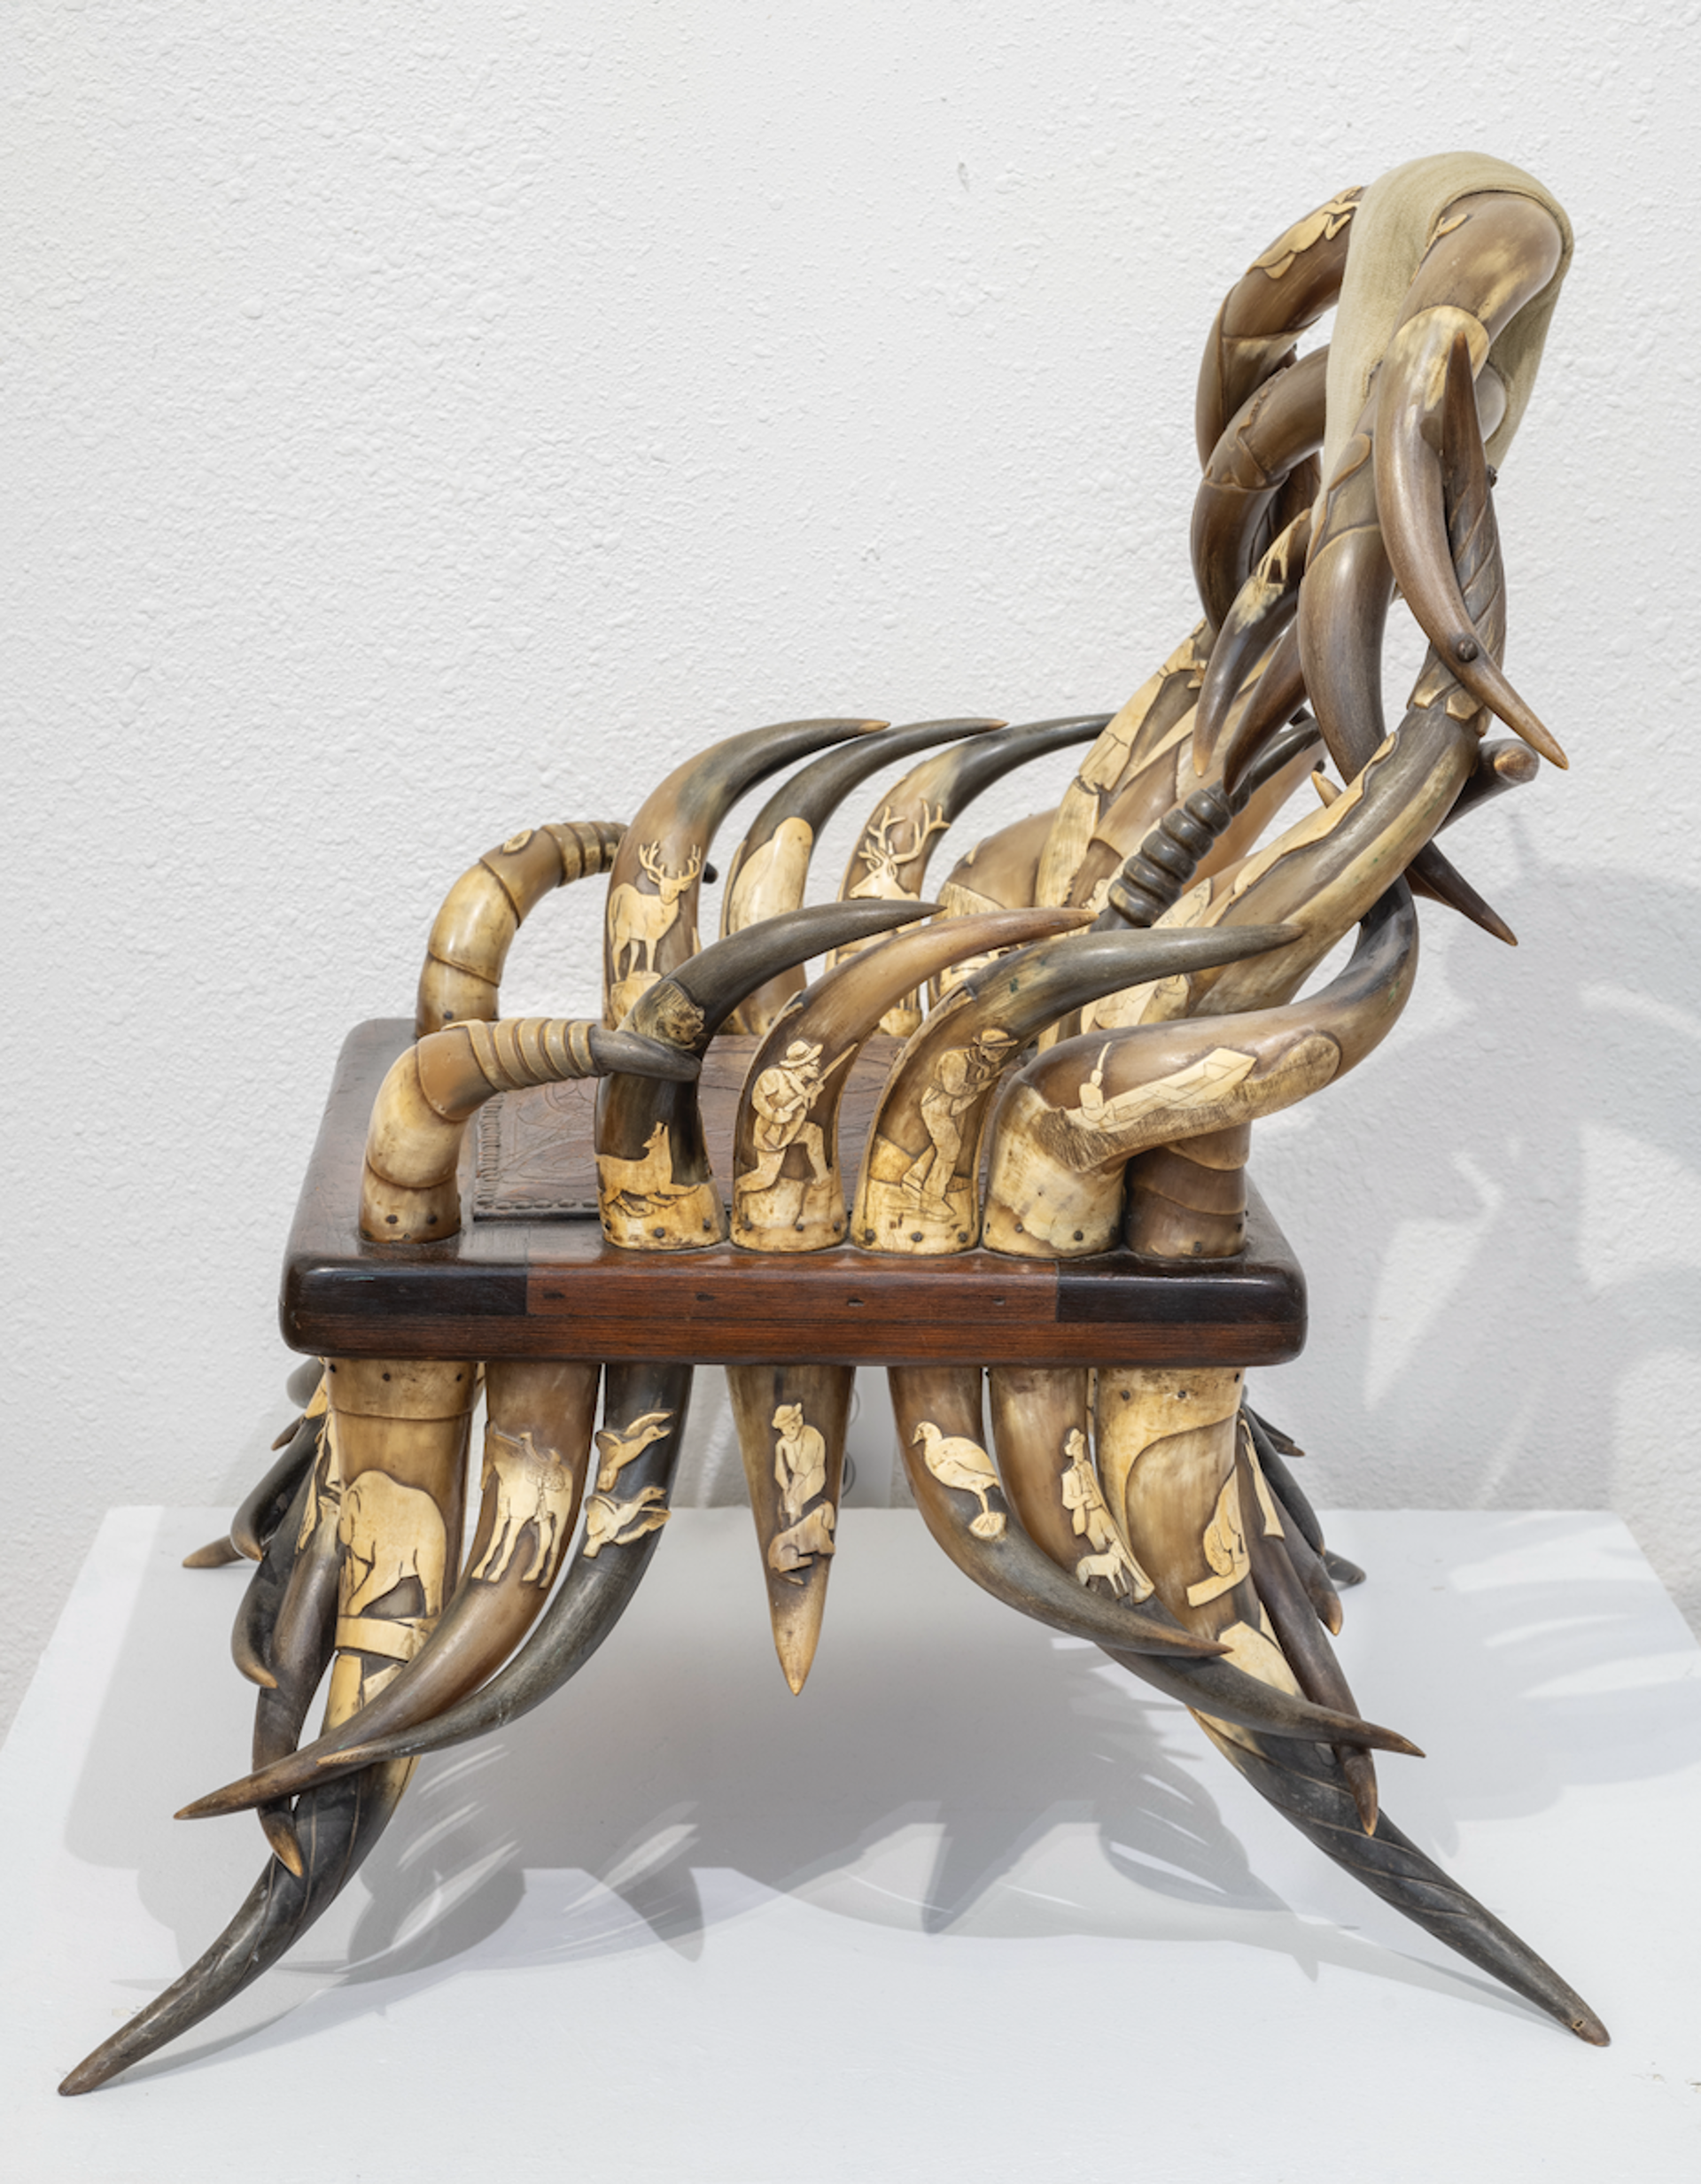 DS-1: Carved longhorn child's chair; 51 carved horns, with tooled leather seat by Dan Super